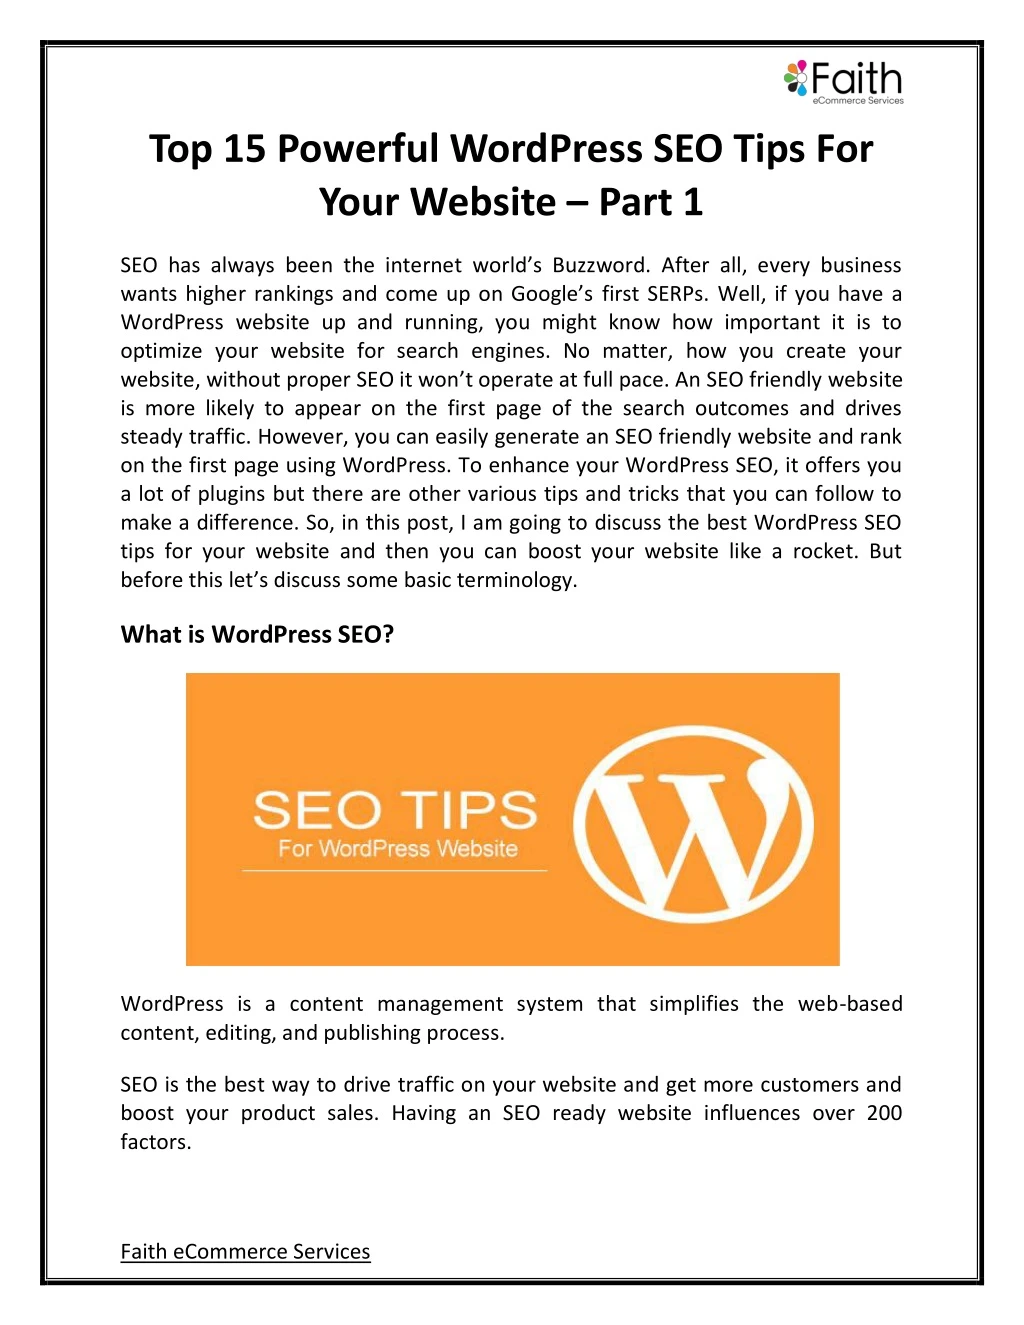 top 15 powerful wordpress seo tips for your